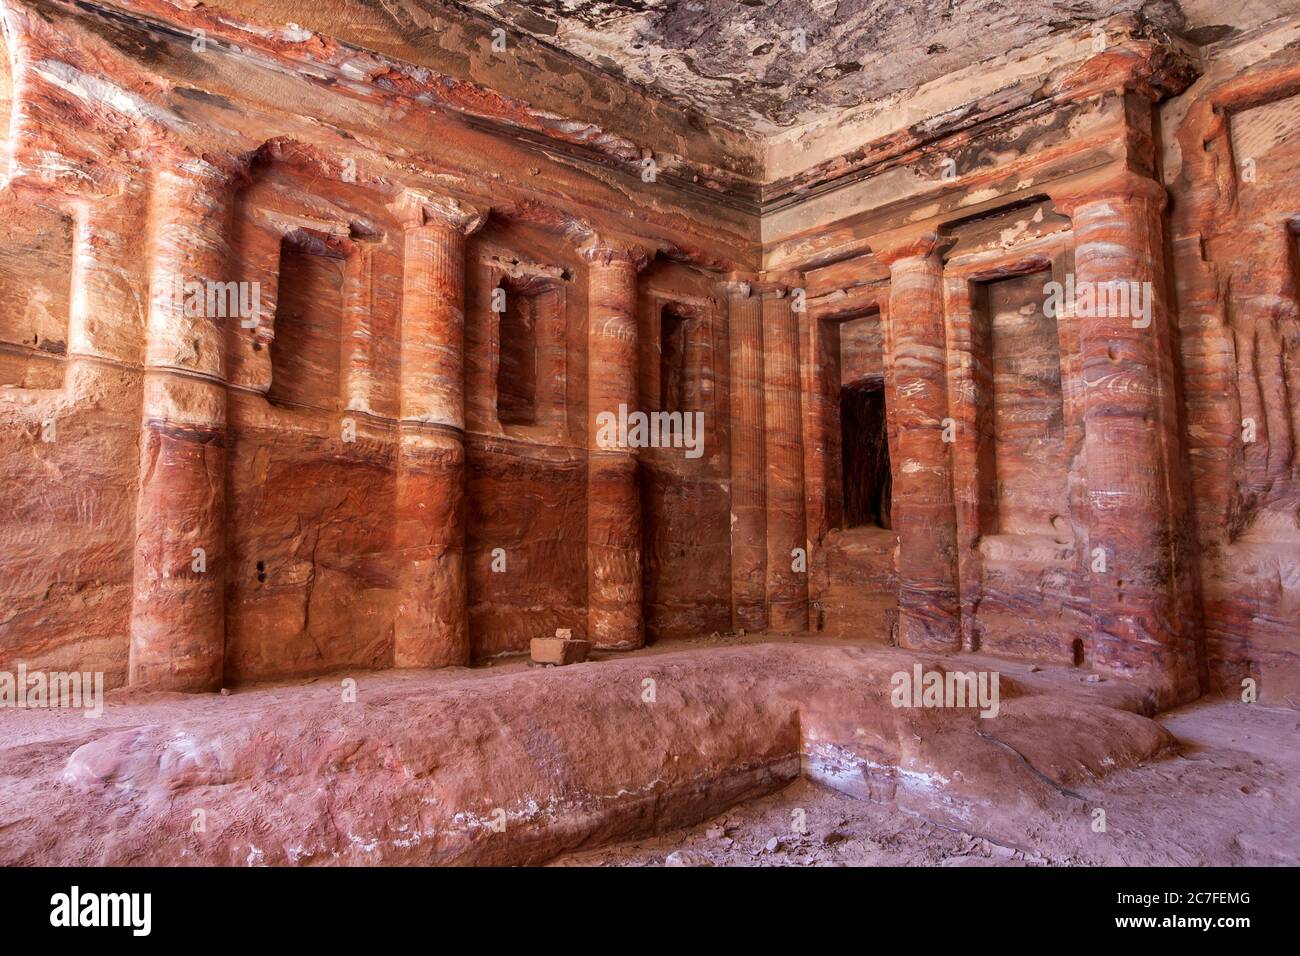 The interior of the Coloured Triclinium which dates from 200 BC to 200 AD. It is located on the Wadi Al Farasa processional route at Petra in Jordan. Stock Photo